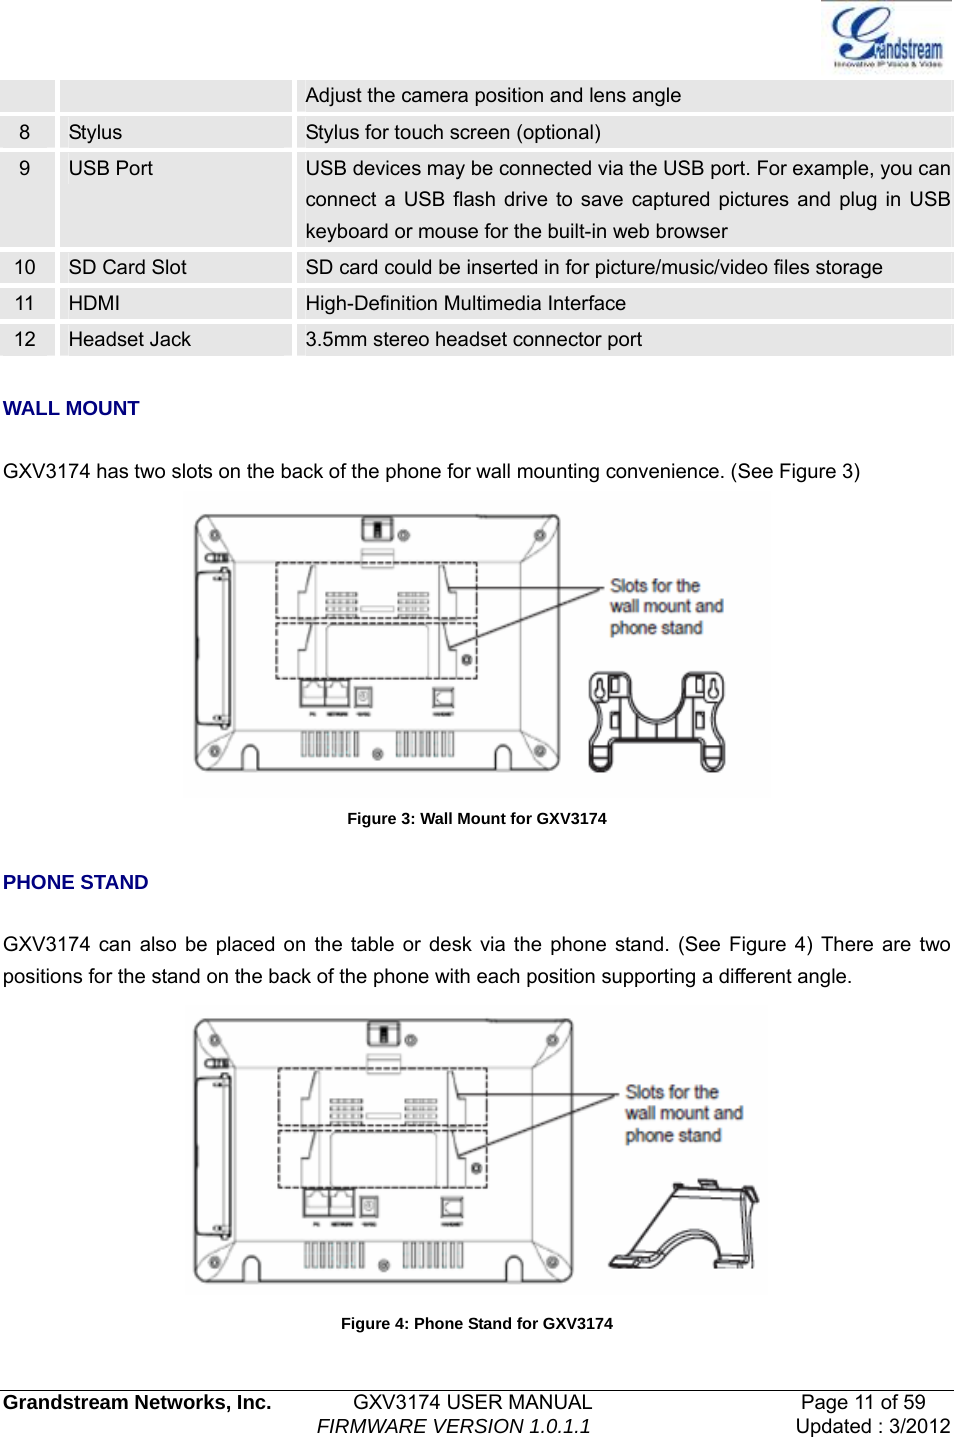   Grandstream Networks, Inc.        GXV3174 USER MANUAL                     Page 11 of 59                                FIRMWARE VERSION 1.0.1.1  Updated : 3/2012  Adjust the camera position and lens angle 8  Stylus  Stylus for touch screen (optional) 9  USB Port  USB devices may be connected via the USB port. For example, you can connect a USB flash drive to save captured pictures and plug in USB keyboard or mouse for the built-in web browser 10  SD Card Slot  SD card could be inserted in for picture/music/video files storage 11  HDMI  High-Definition Multimedia Interface 12  Headset Jack  3.5mm stereo headset connector port  WALL MOUNT  GXV3174 has two slots on the back of the phone for wall mounting convenience. (See Figure 3)  Figure 3: Wall Mount for GXV3174  PHONE STAND  GXV3174 can also be placed on the table or desk via the phone stand. (See Figure 4) There are two positions for the stand on the back of the phone with each position supporting a different angle.    Figure 4: Phone Stand for GXV3174 